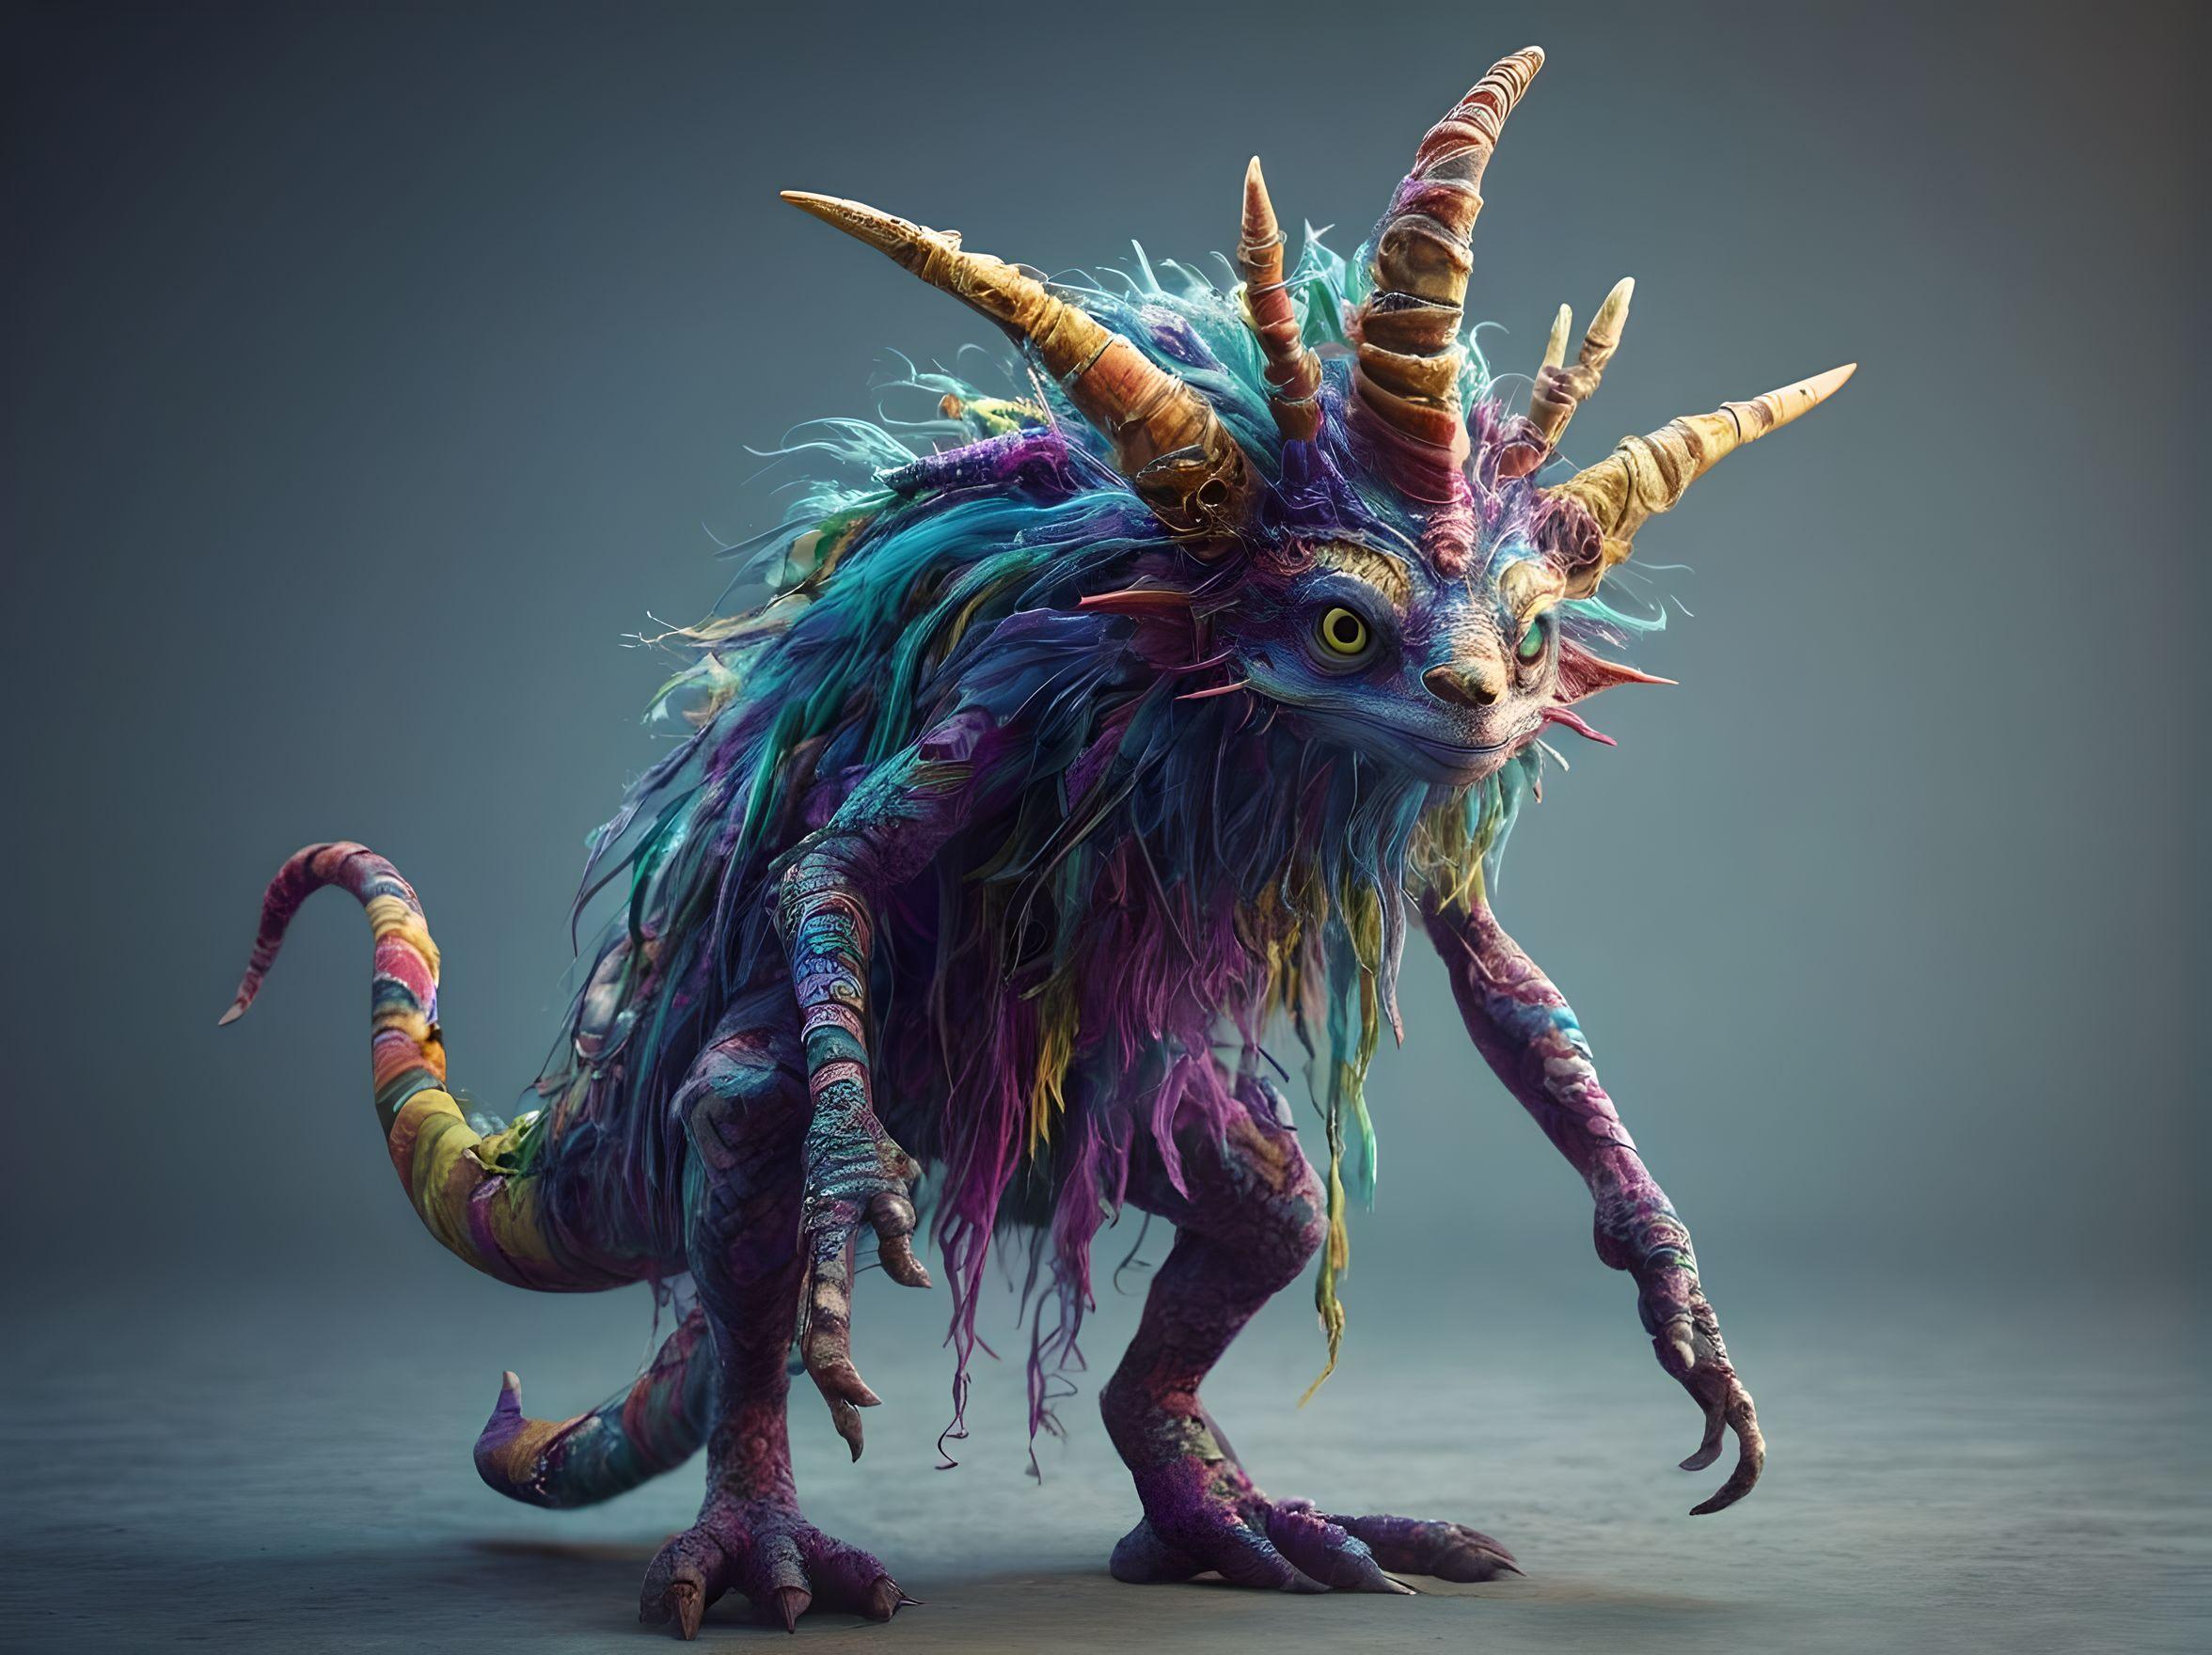 enchanting world of whimsical and legendary monsters- Magical Creature. artistic. gorgeous. 
The image displays a fictional whimsical character with long tails. funny animal. weird animal. fictional animal. The style is abstract and playful
